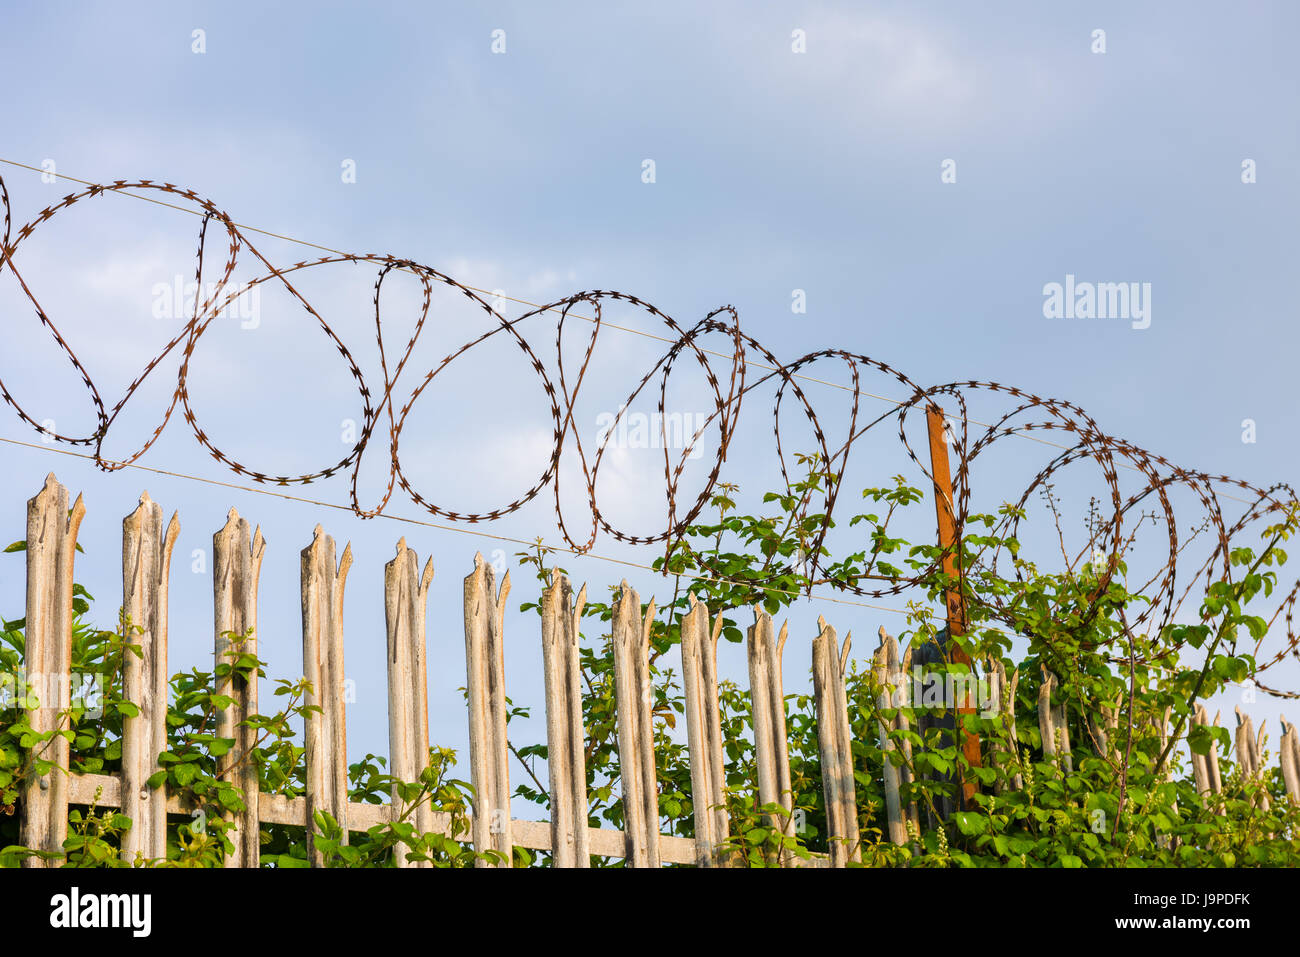 Razor wire on the top of Palisade Security fencing. Stock Photo